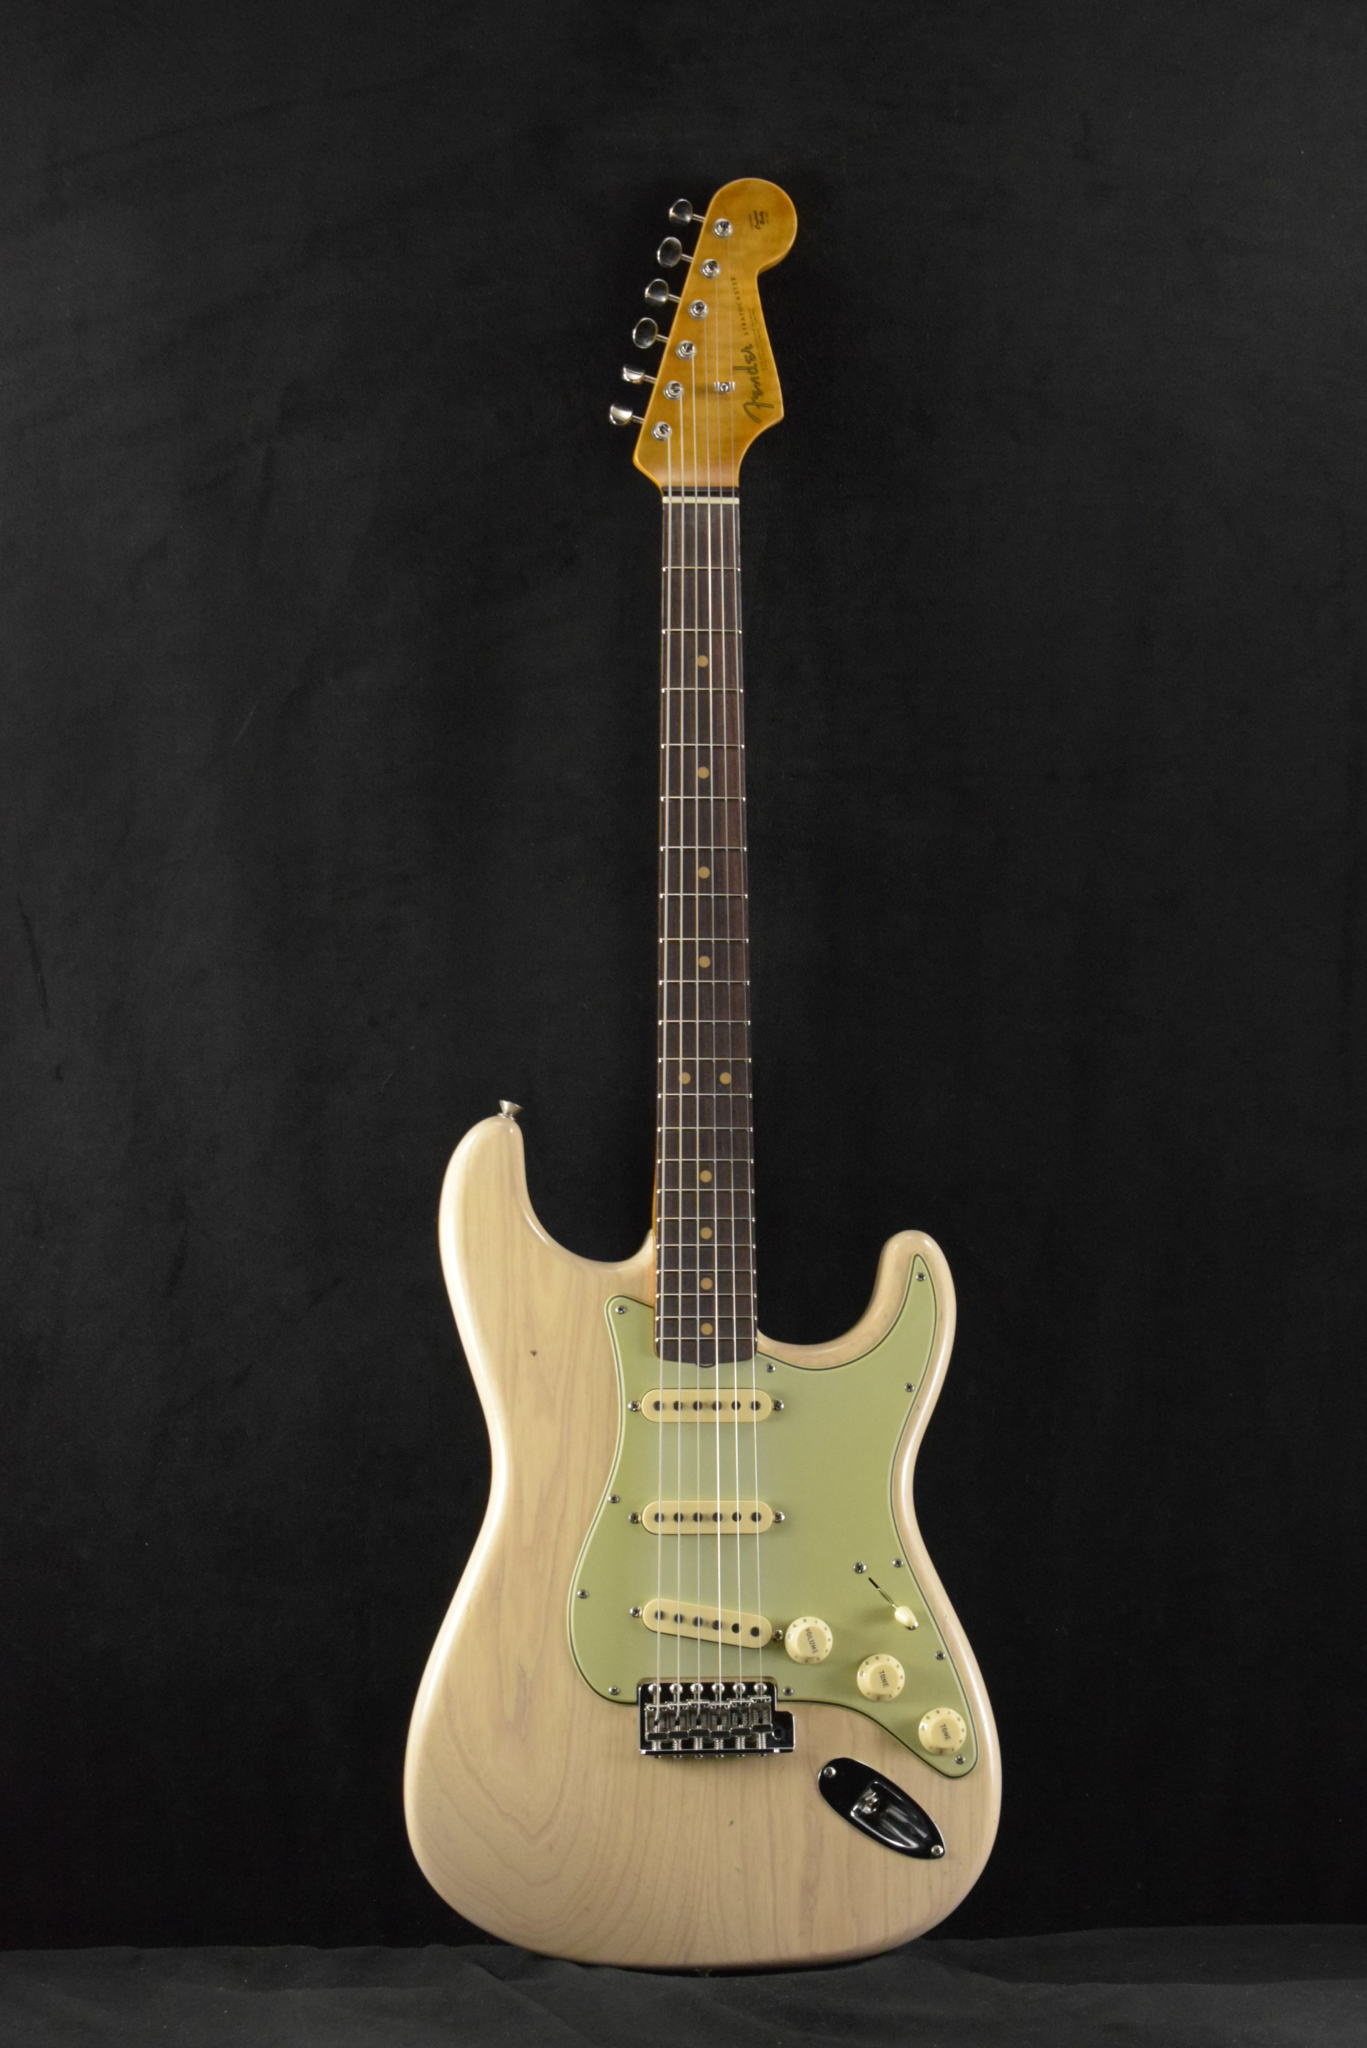 Take a first look at the student model-inspired Fender Custom Shop